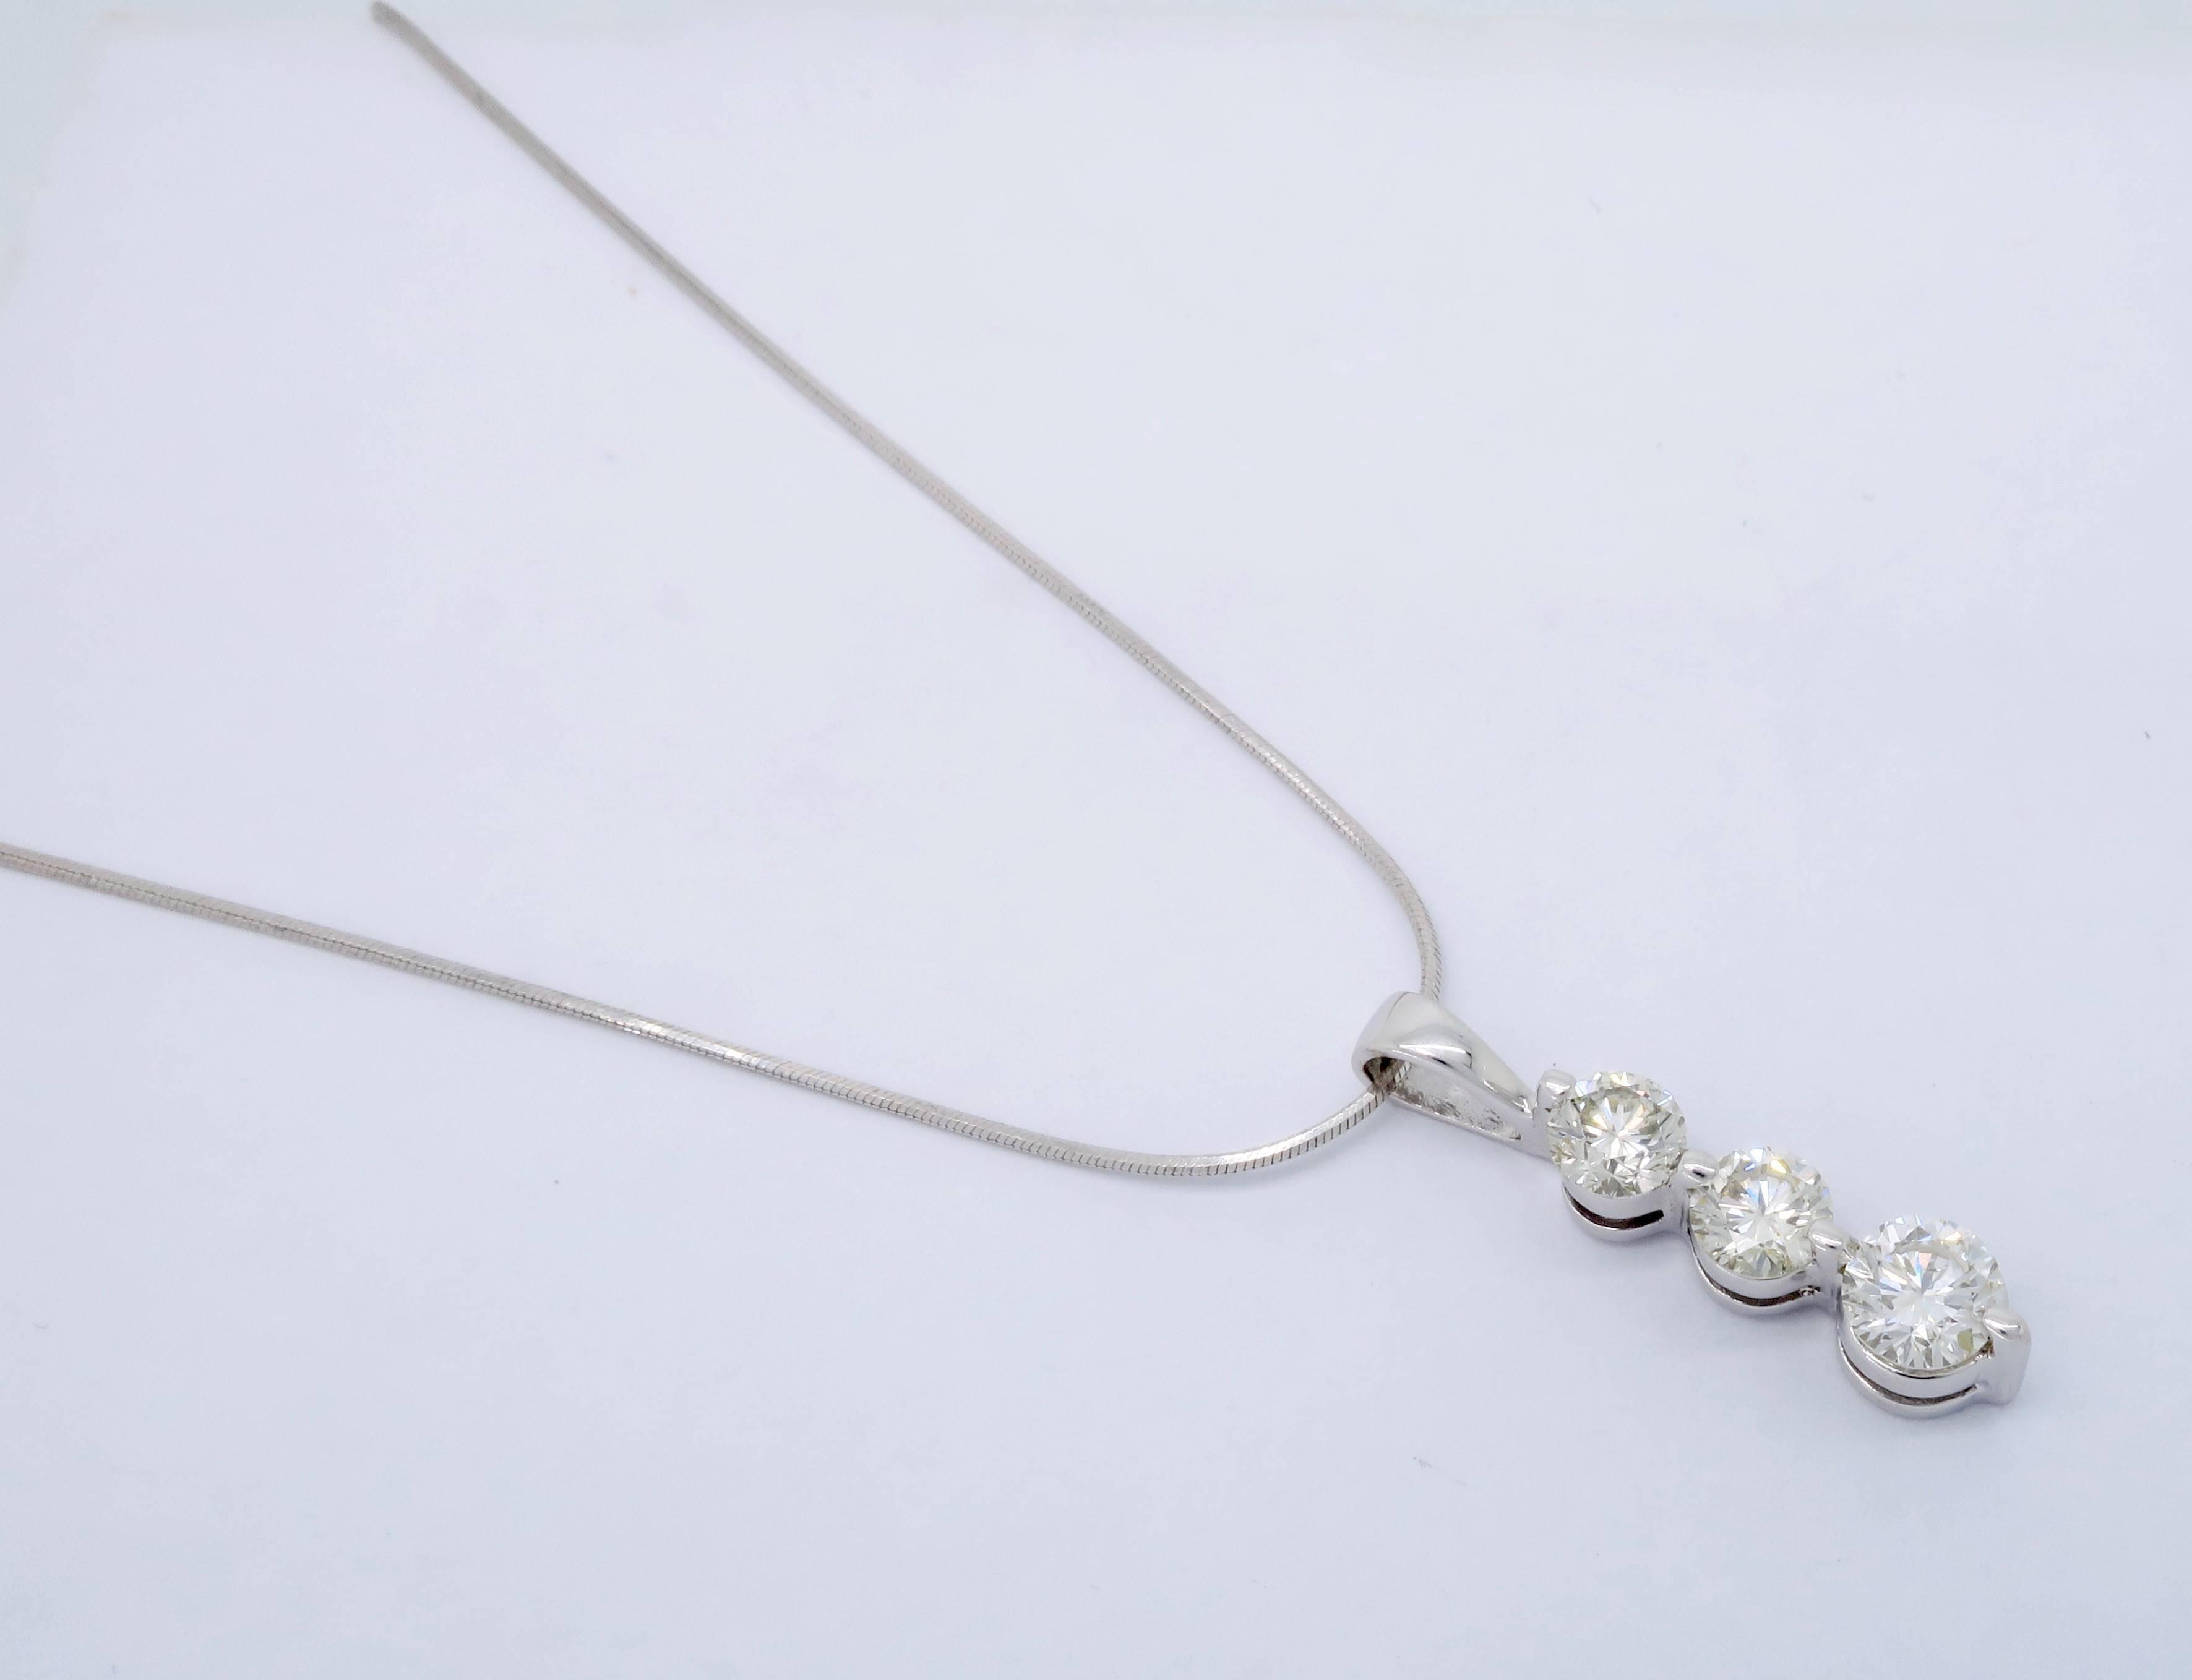 This three stone Diamond necklace features 3 Round Brilliant Cut Diamonds displaying I-K color and SI clarity. There is approximately 1.00CTW of diamonds in this 14K white gold necklace. The necklace is 16.5” in length and weighs 3.4 grams.